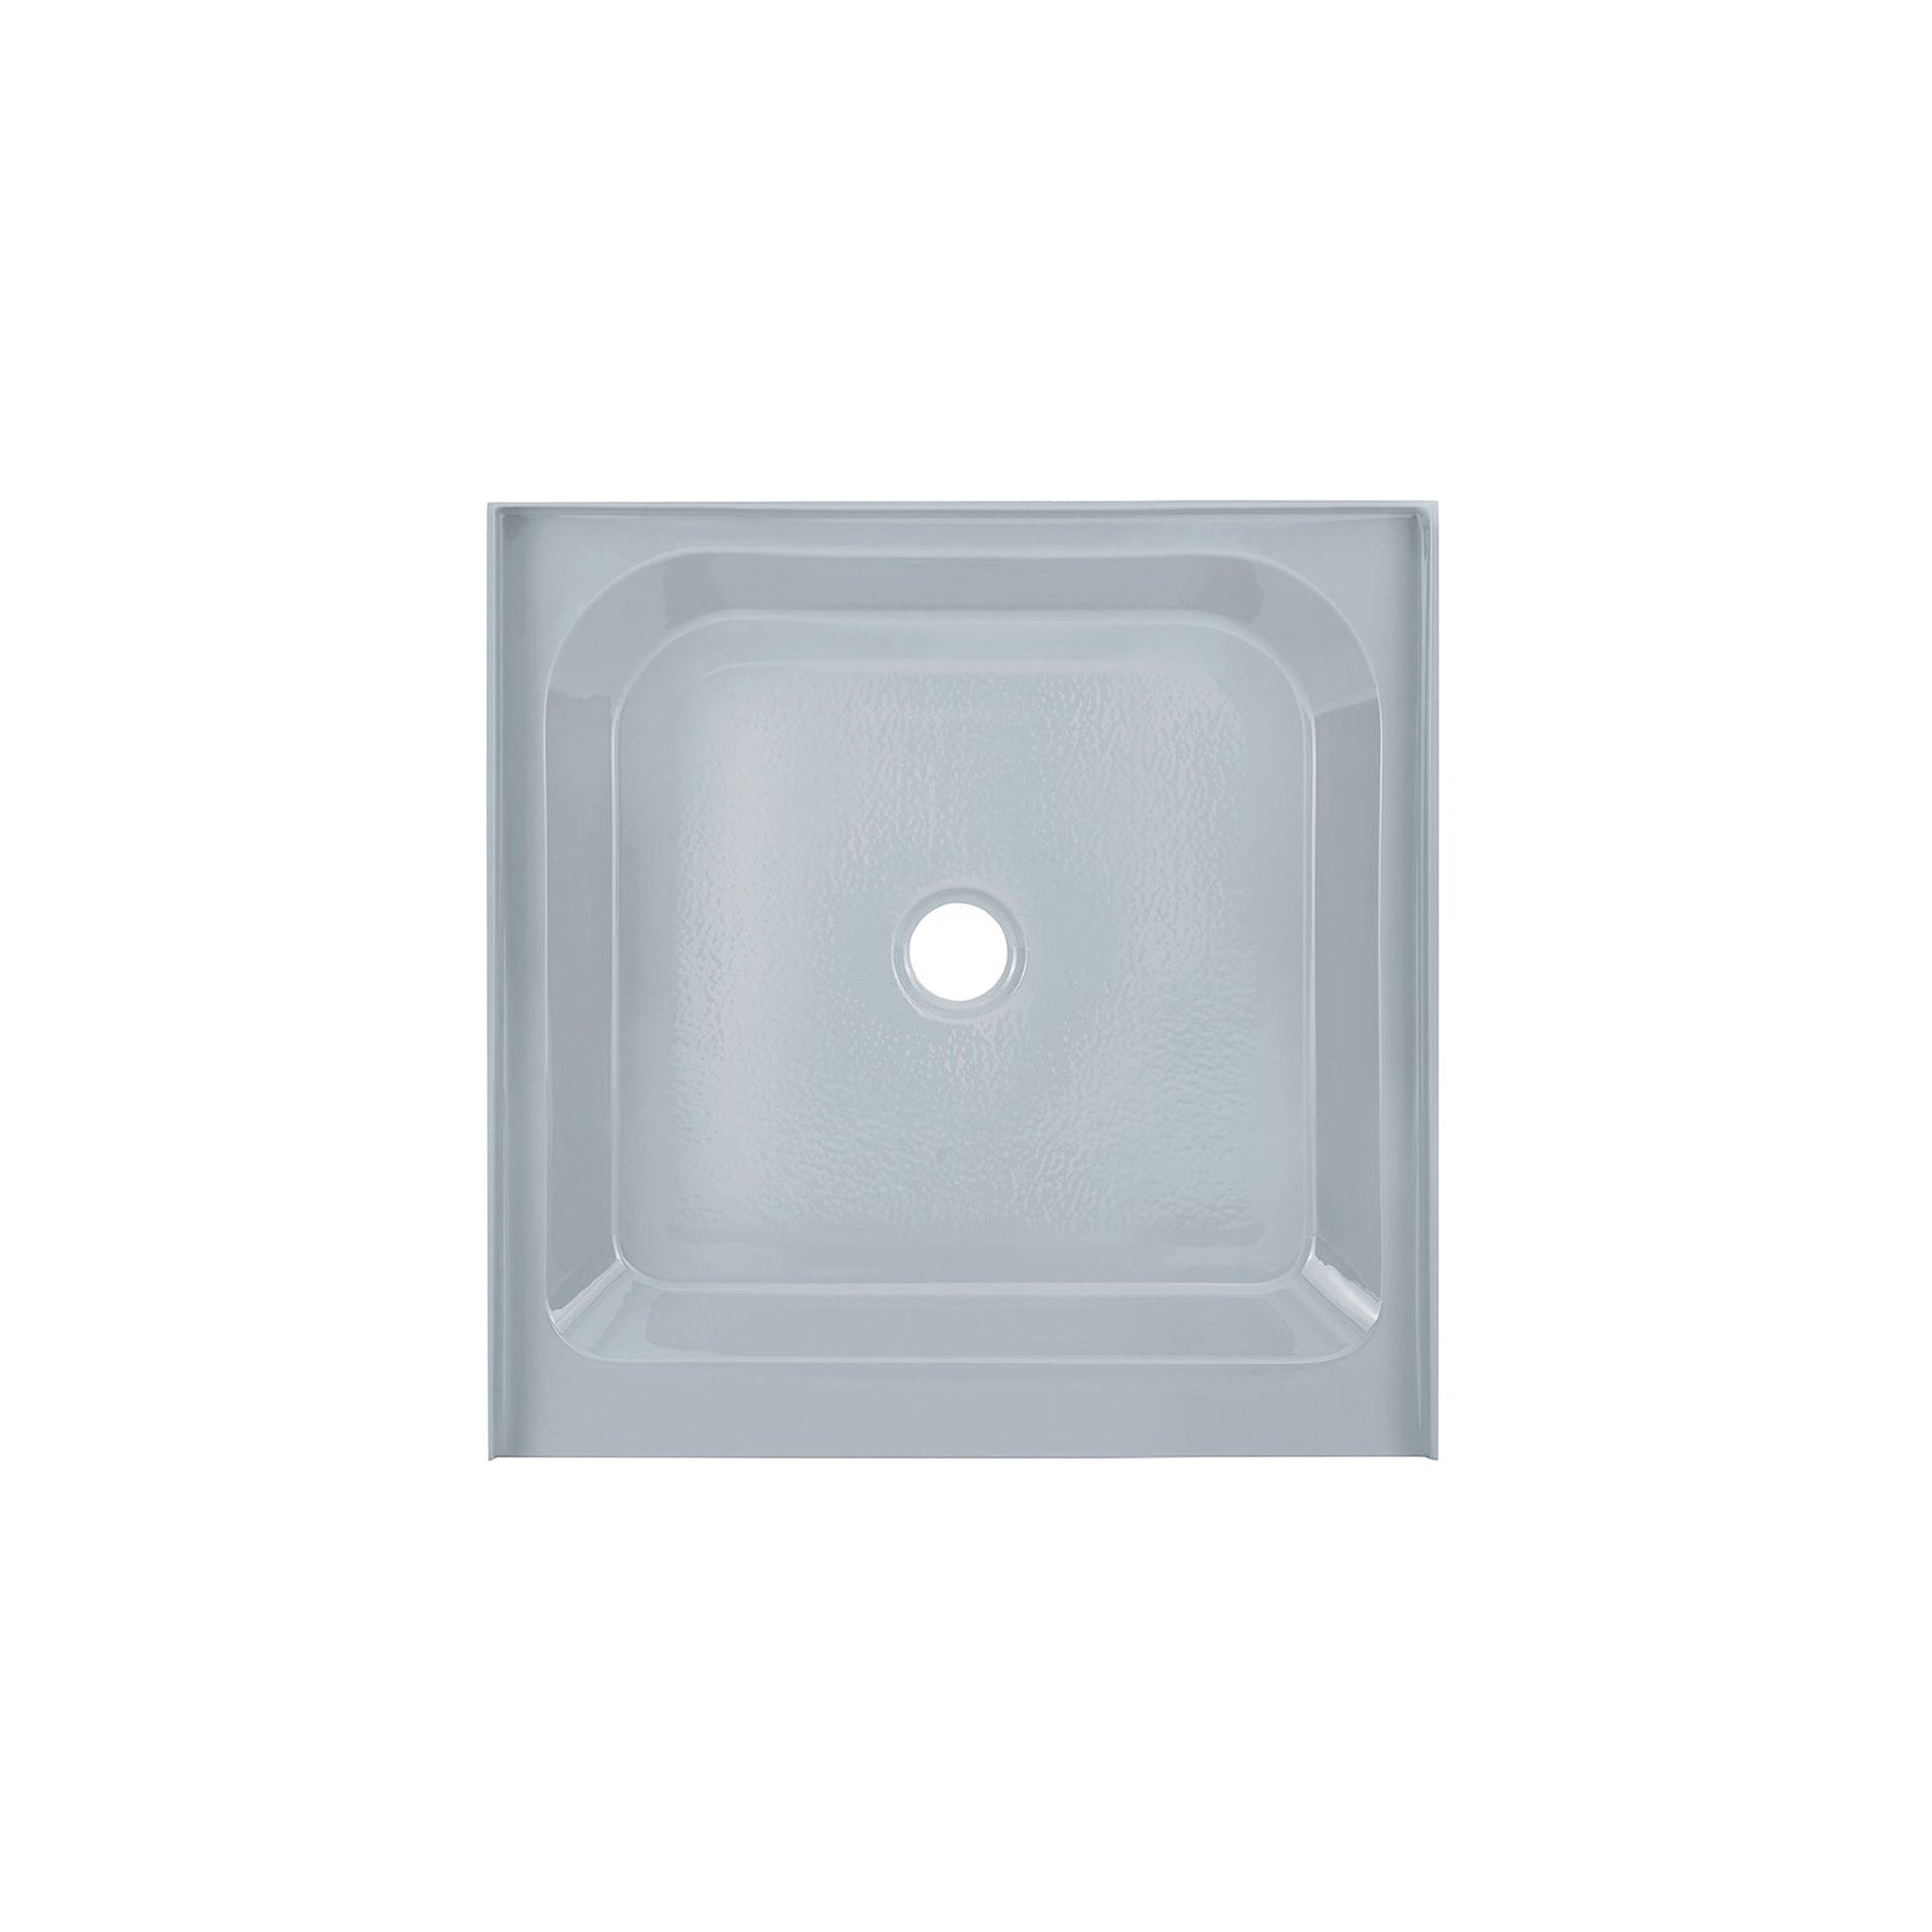 Swiss Madison Voltaire 36" x 36" Three-Wall Alcove Gray Center-Hand Drain Shower Base With Built-In Integral Flange